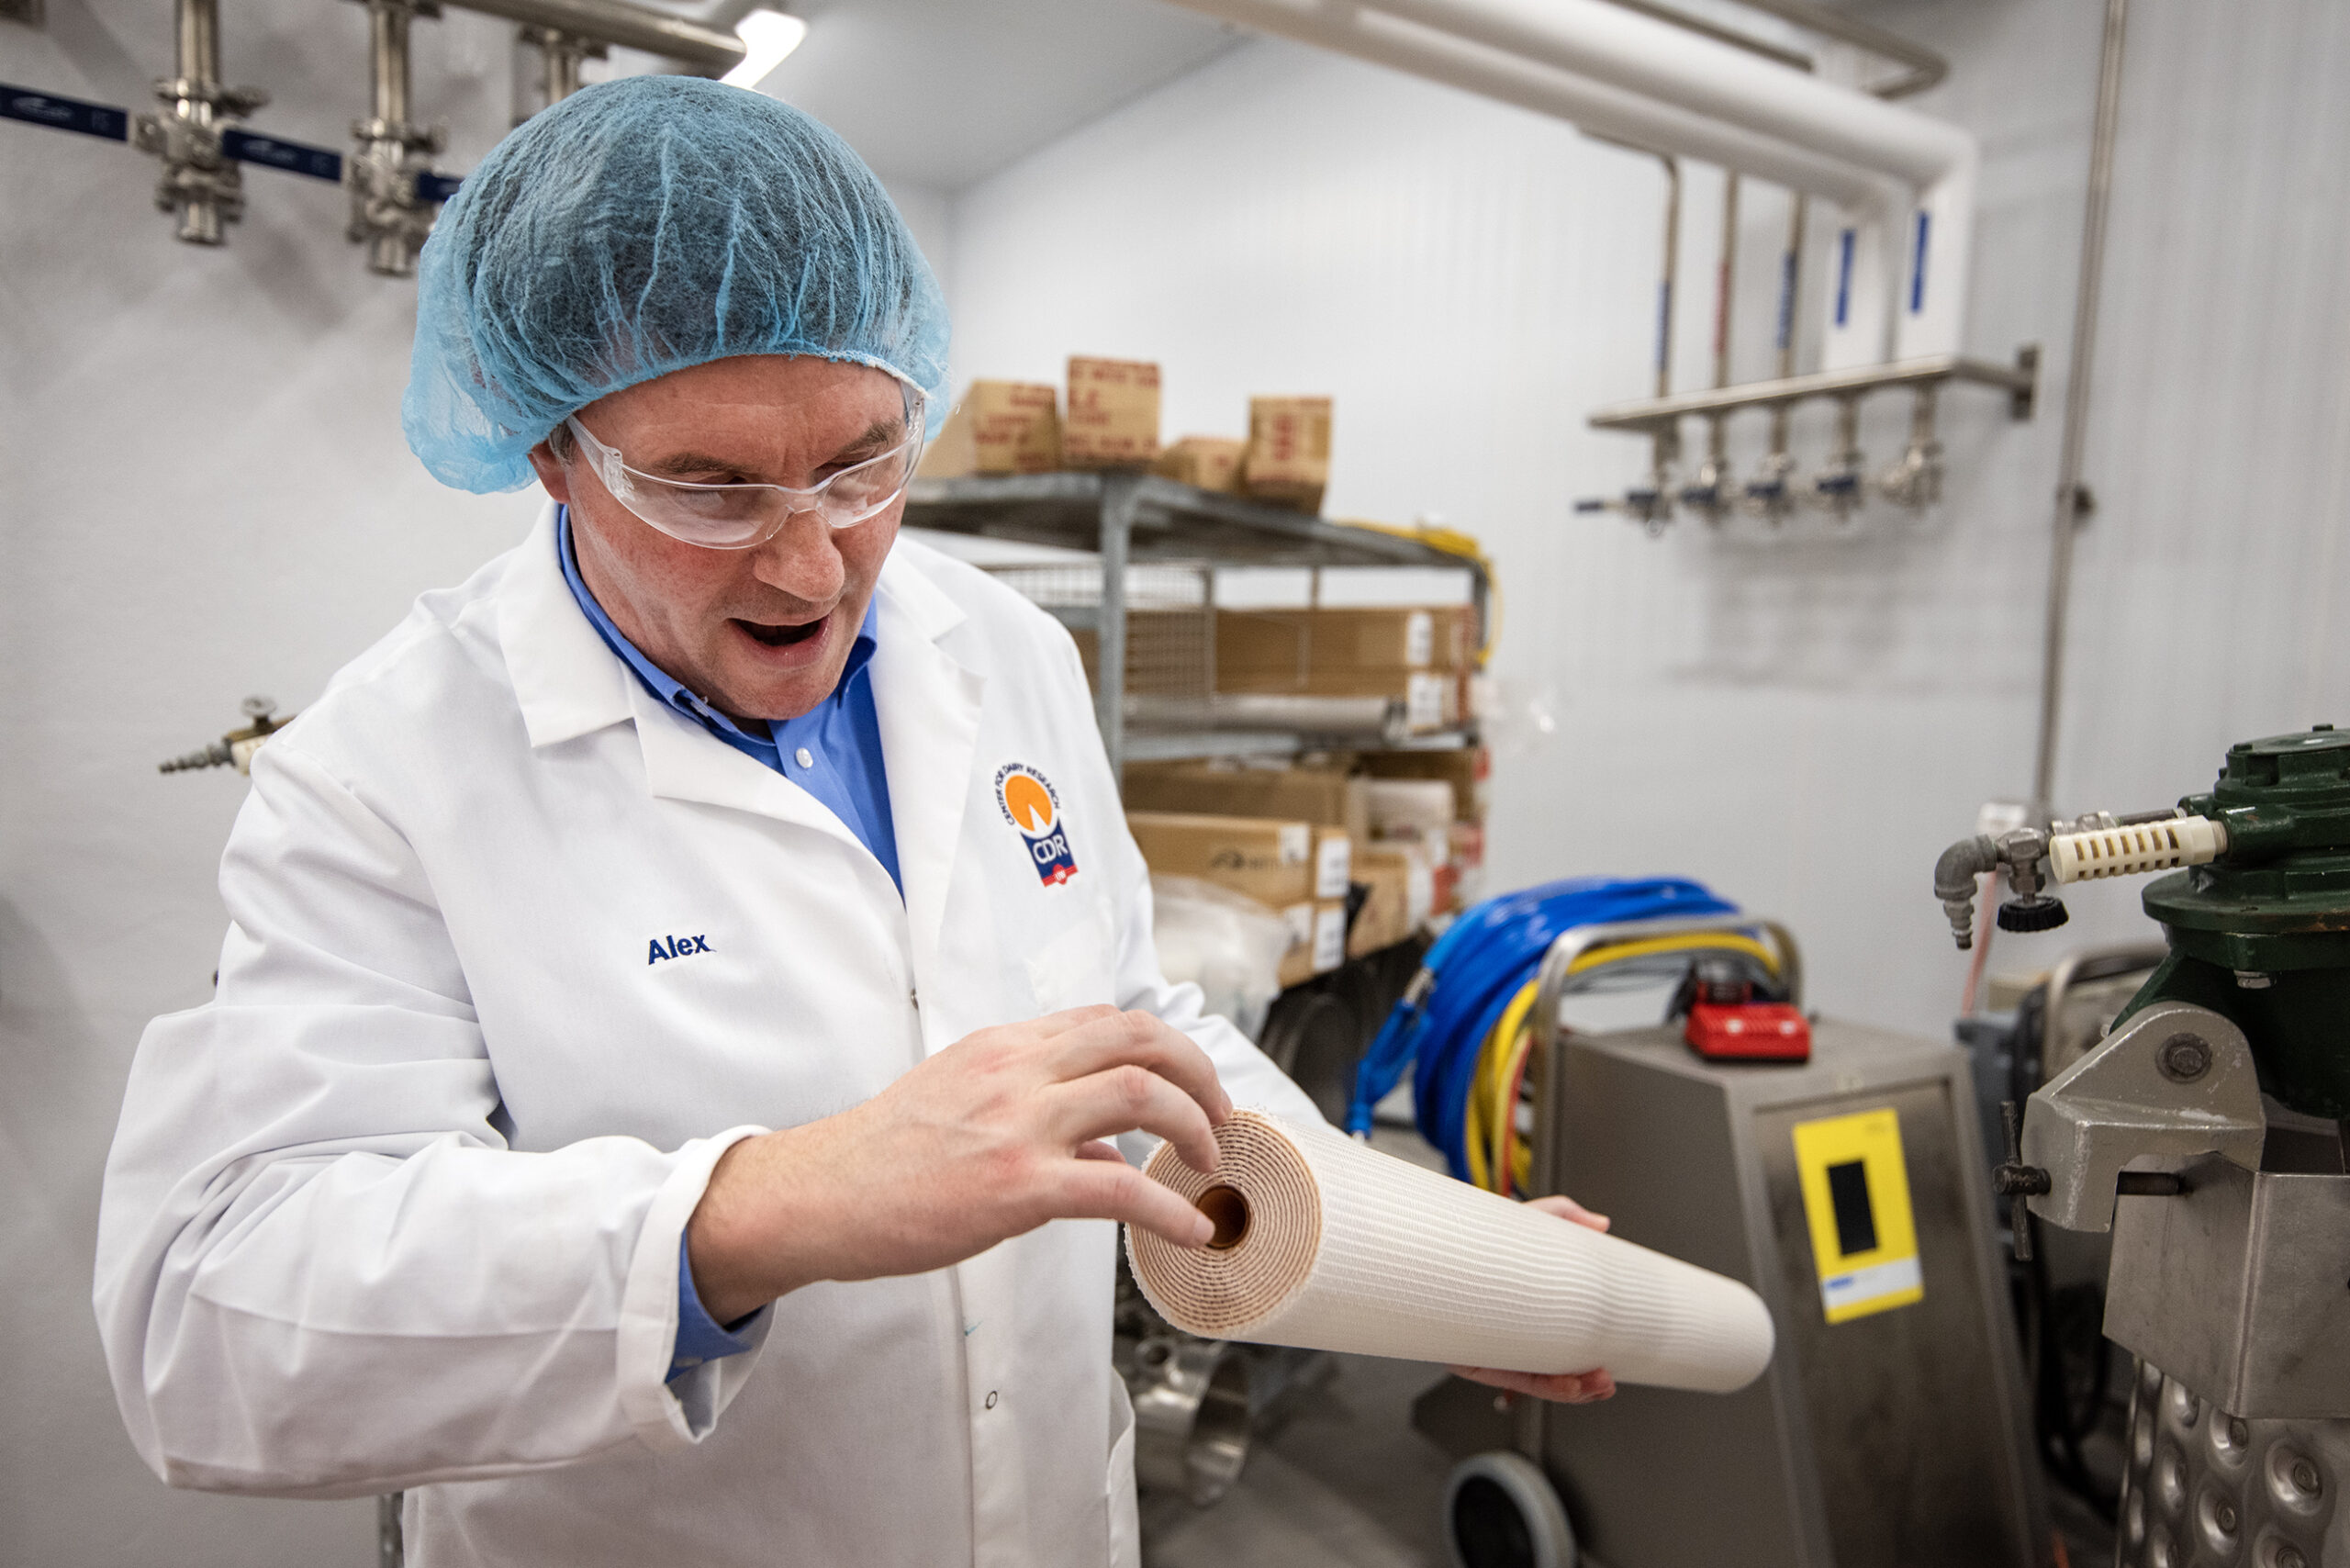 A man with a hairnet and a lab coat holds a roll of white material in a research center.